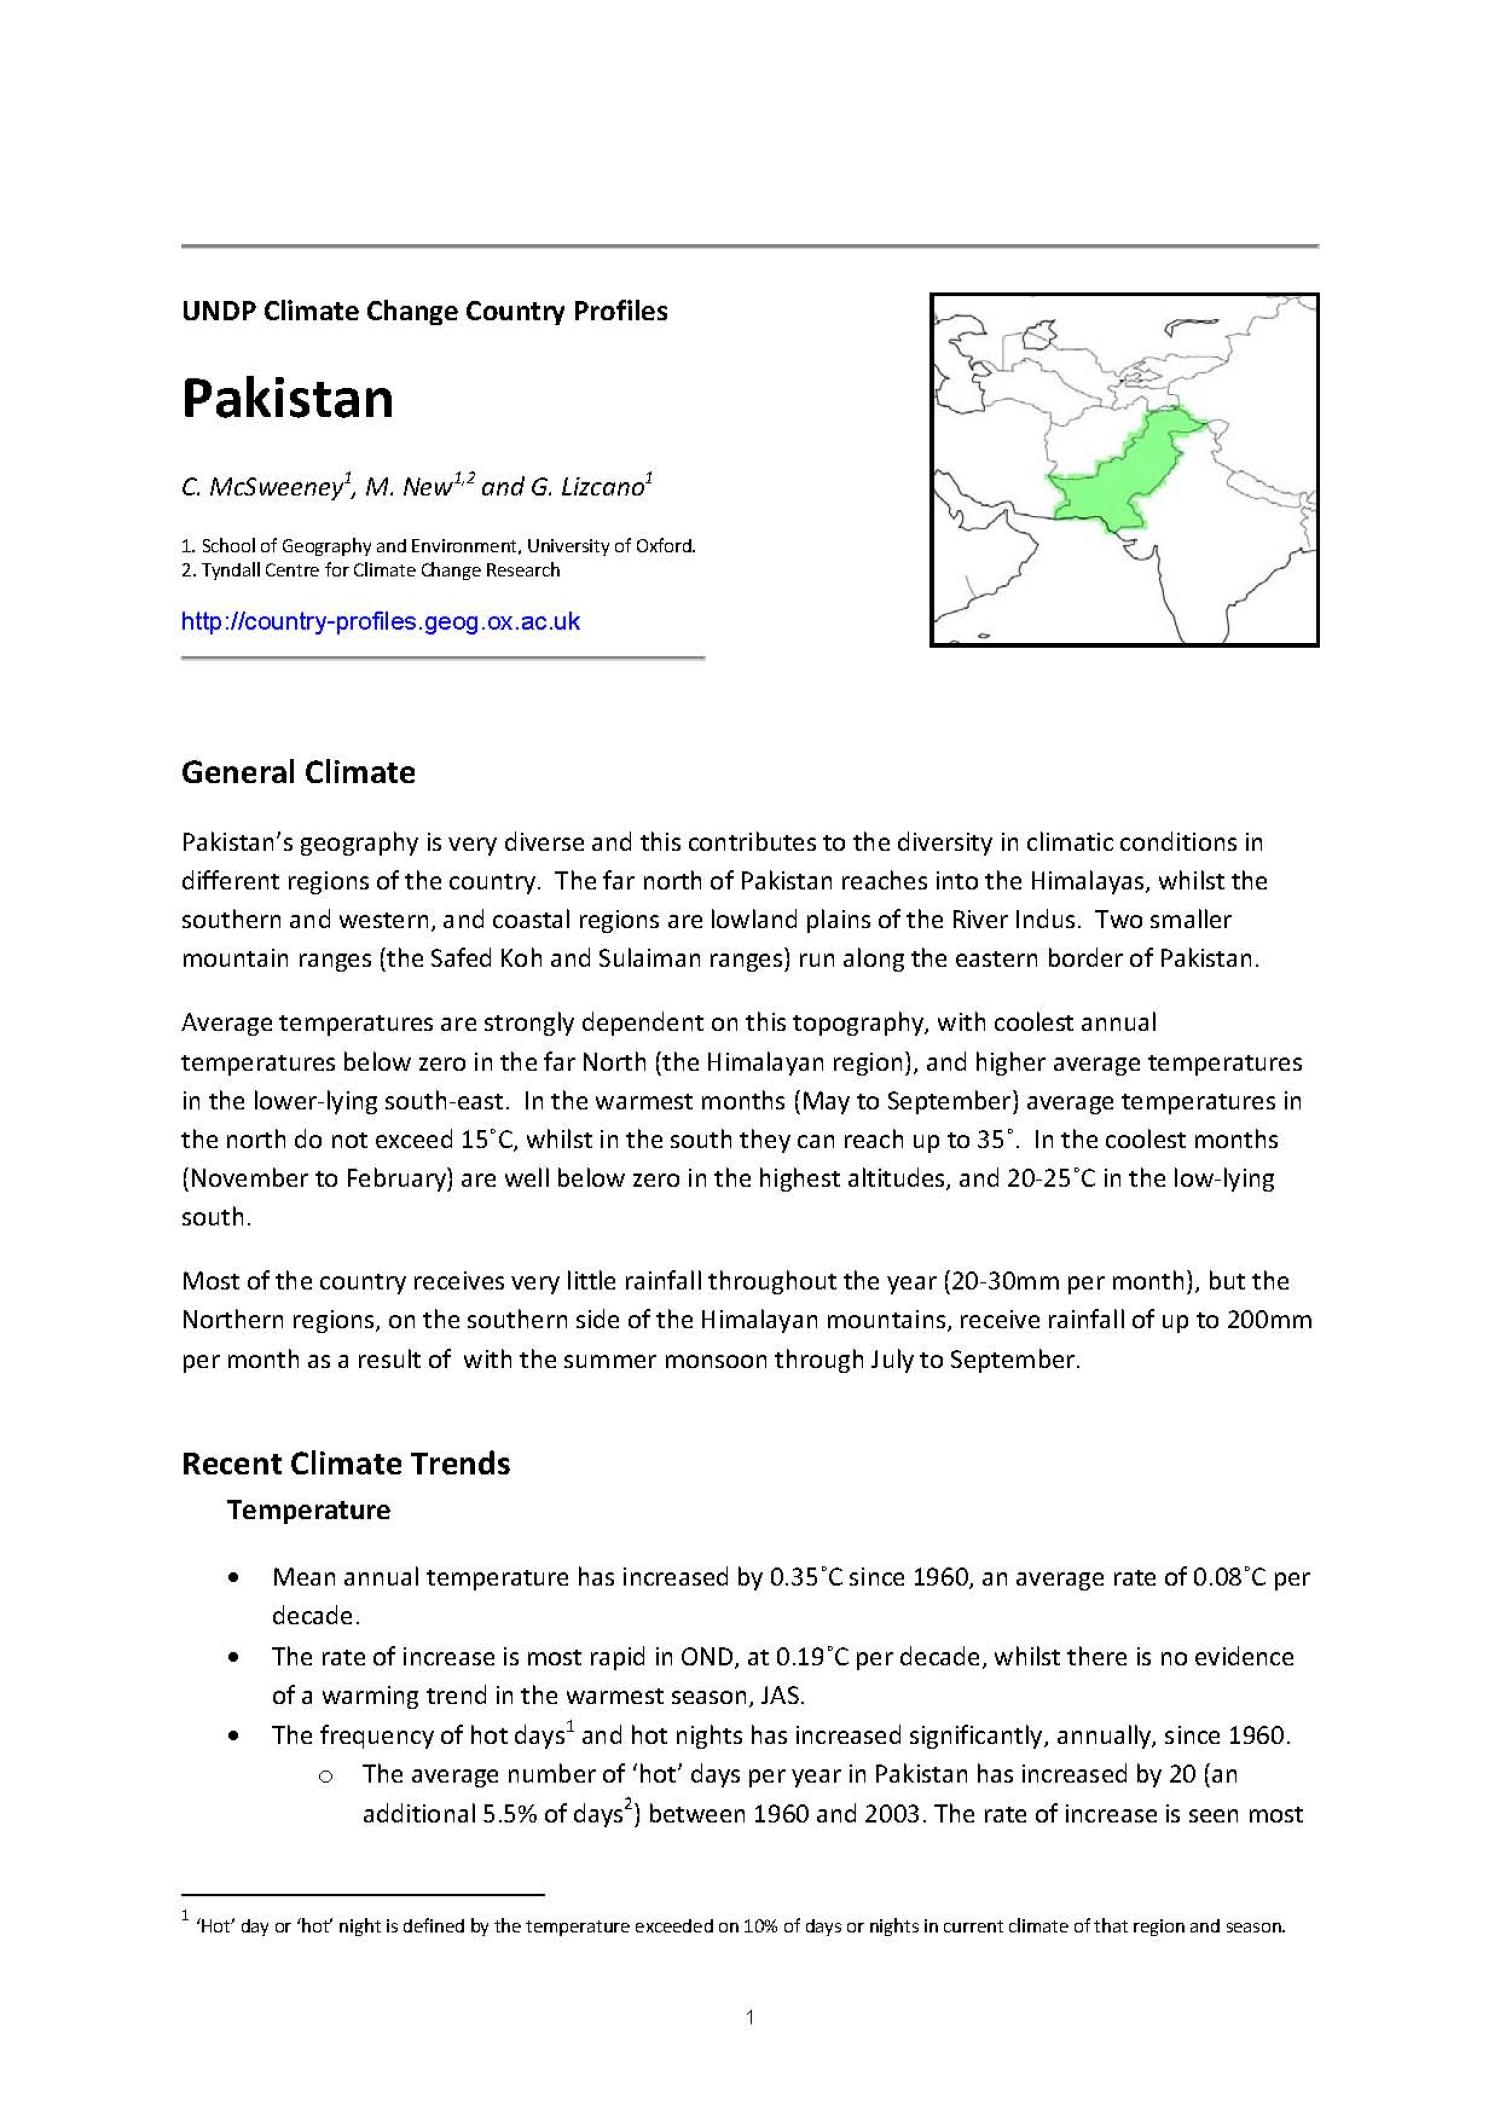 essay on climate change and pakistan